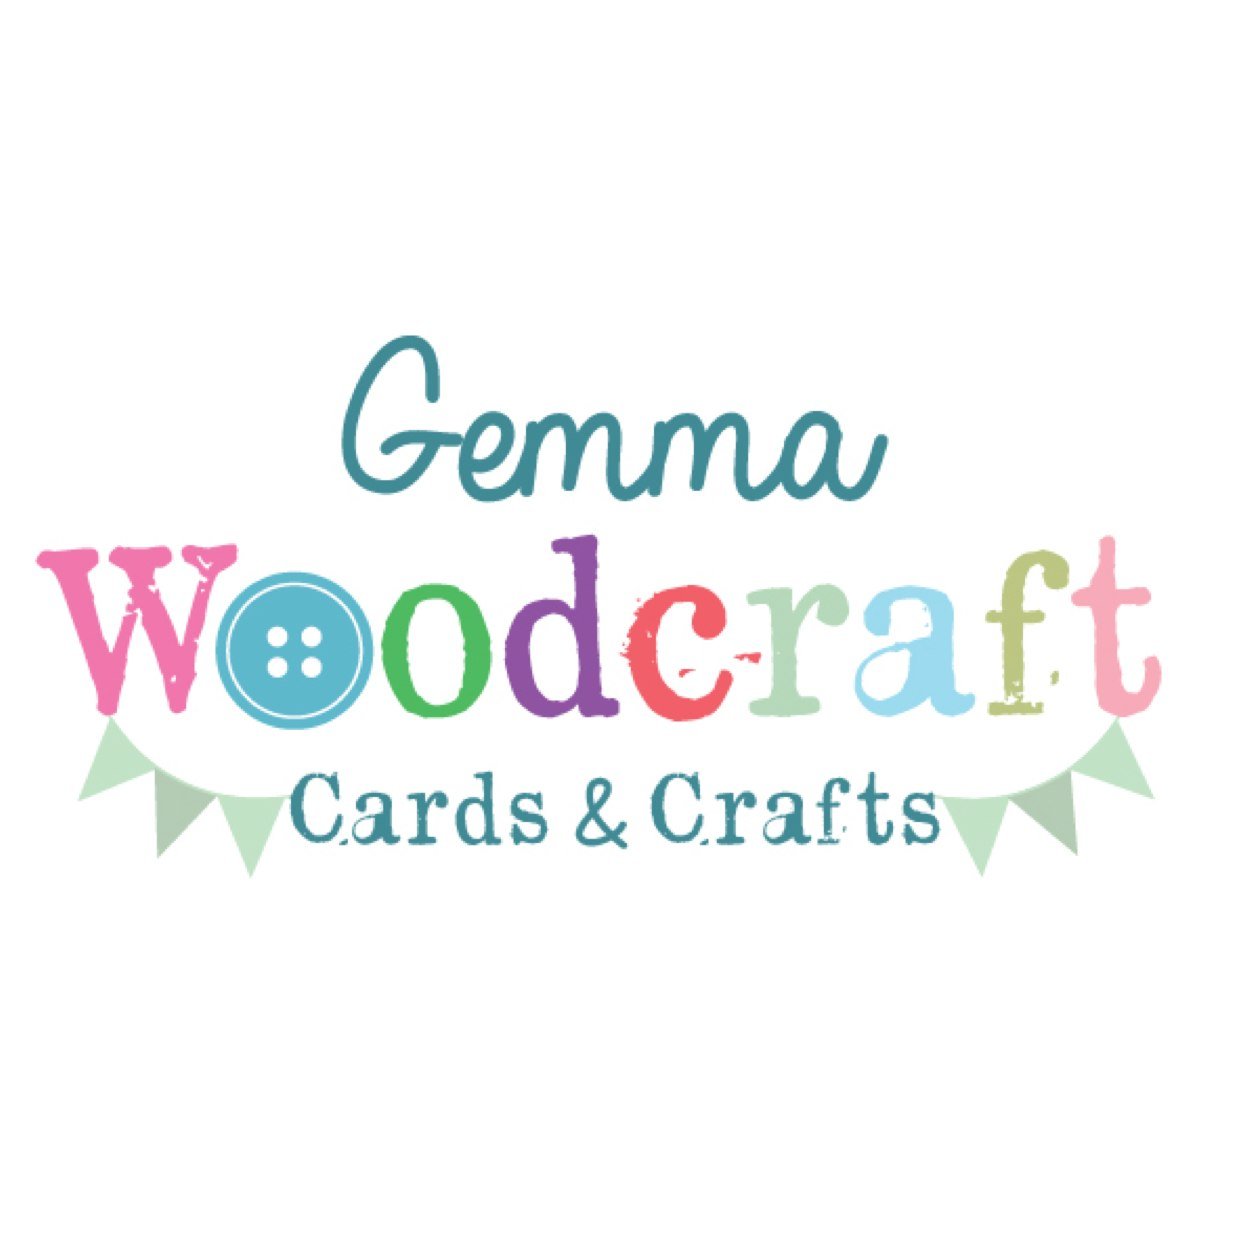 Sewing and crafting to create unique beautiful gifts and keepsakes with personailsed touches x